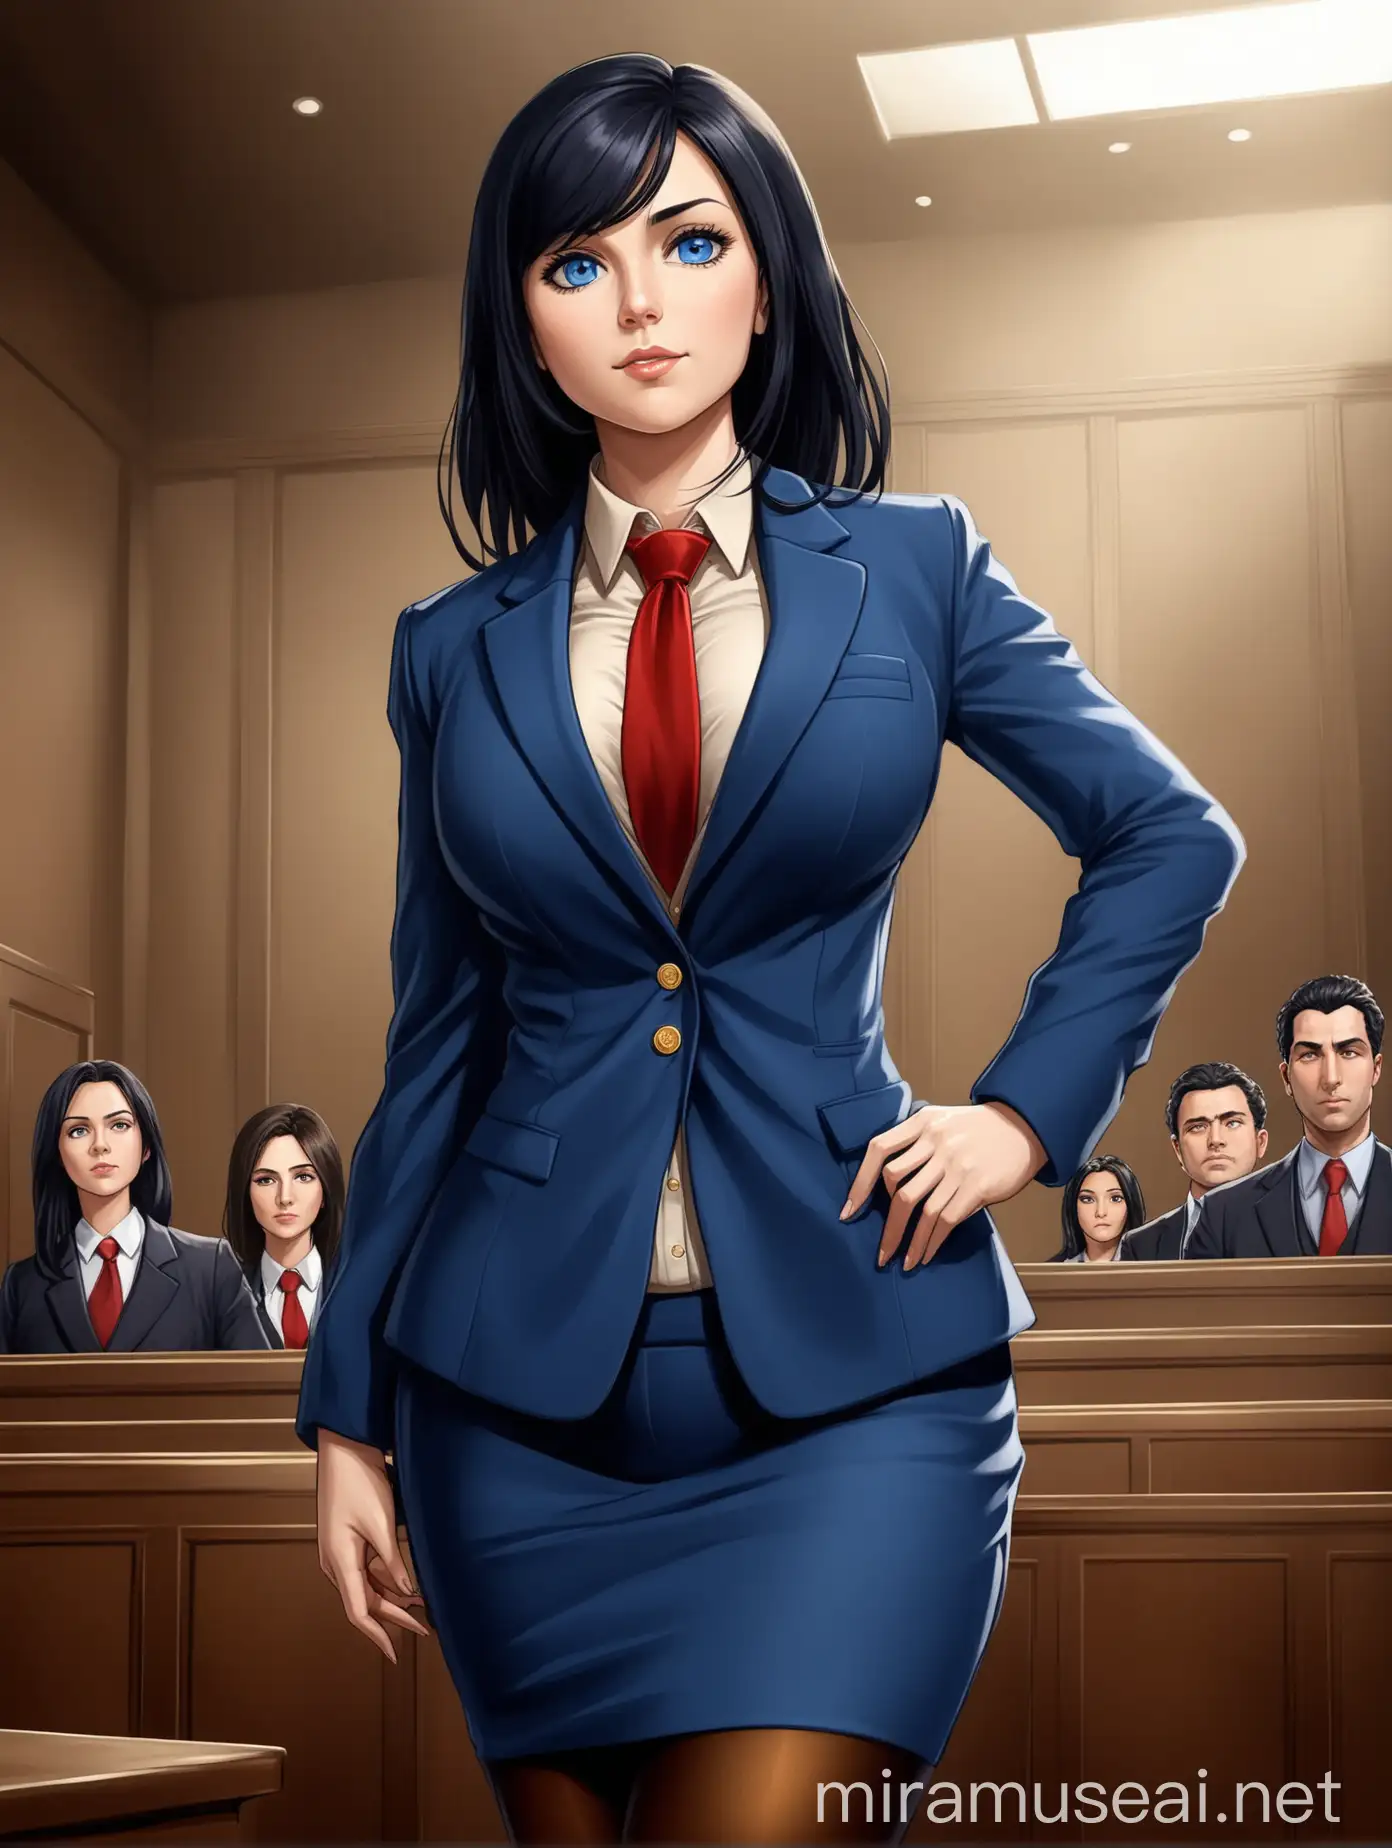 A sexy woman; in her 30s; with medium length styled black hair with prominent fringes,dark blue eyes, slightly curvy figure; wearing a a blue skirtsuit with an open blazer, a light blue vest, red tie, brown pantyhose, dark brown heels and a golden locket in her breast pocket of her blazer; she is an attorney, in a court room; with a confident expression and pose; below angle 